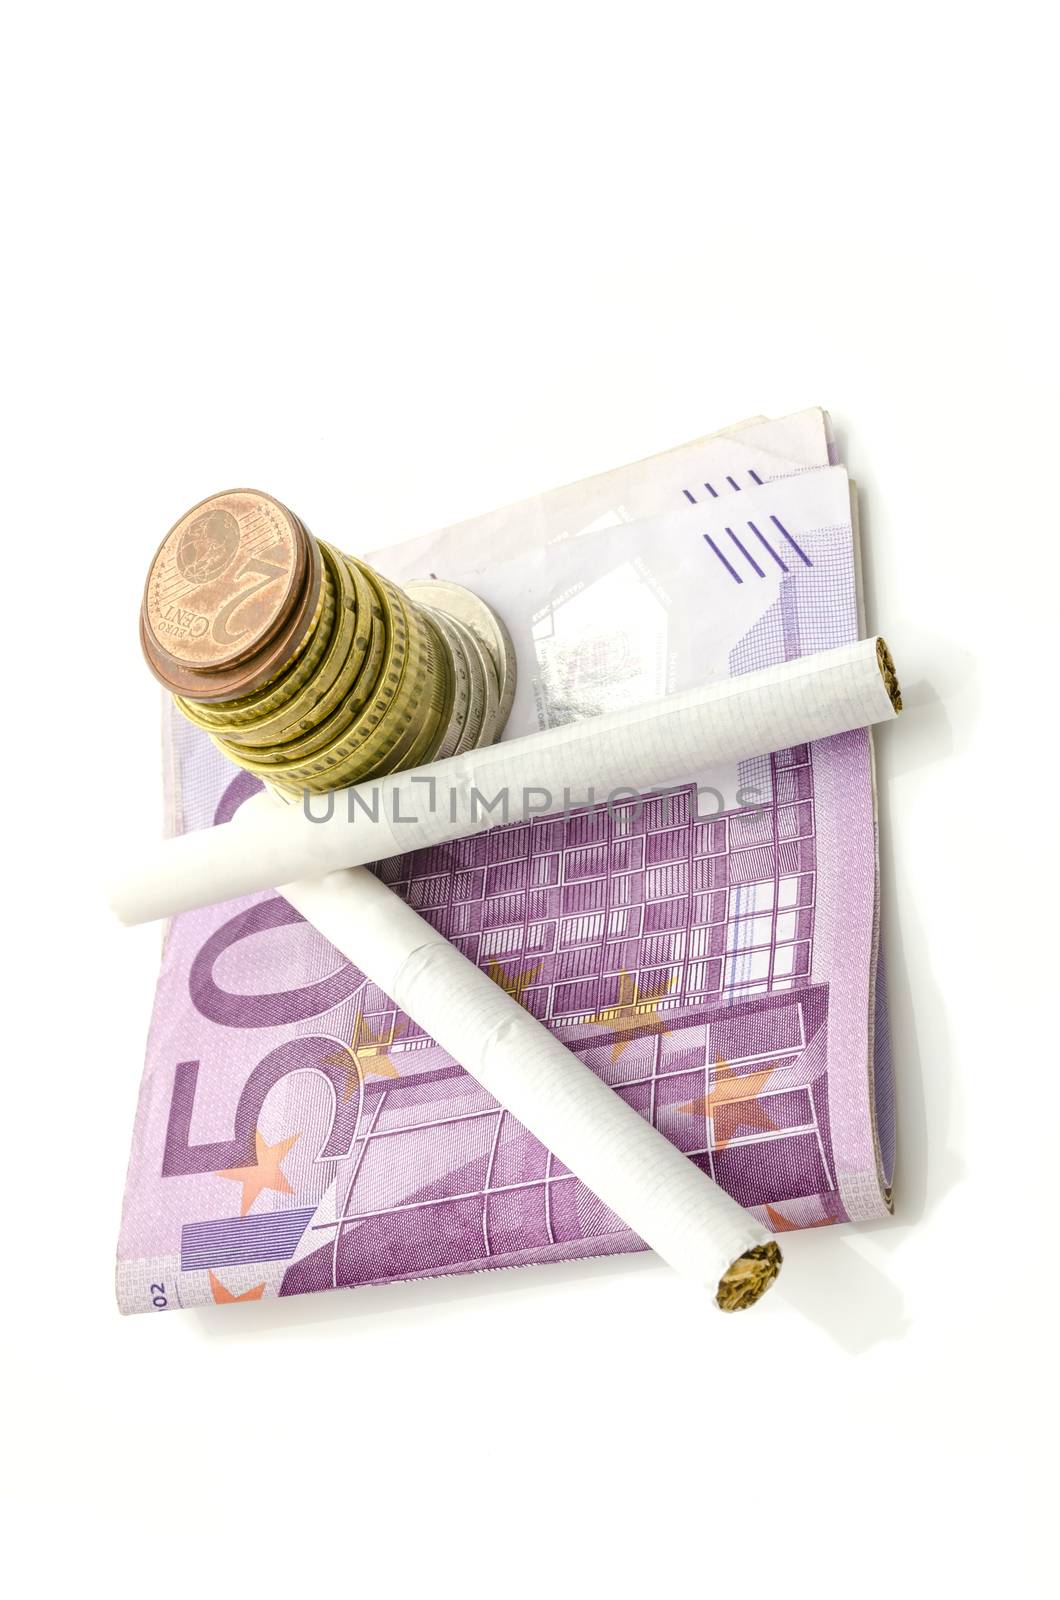 Euro money and cigarettes isolated over white background. Concept of expensive smoking habit.